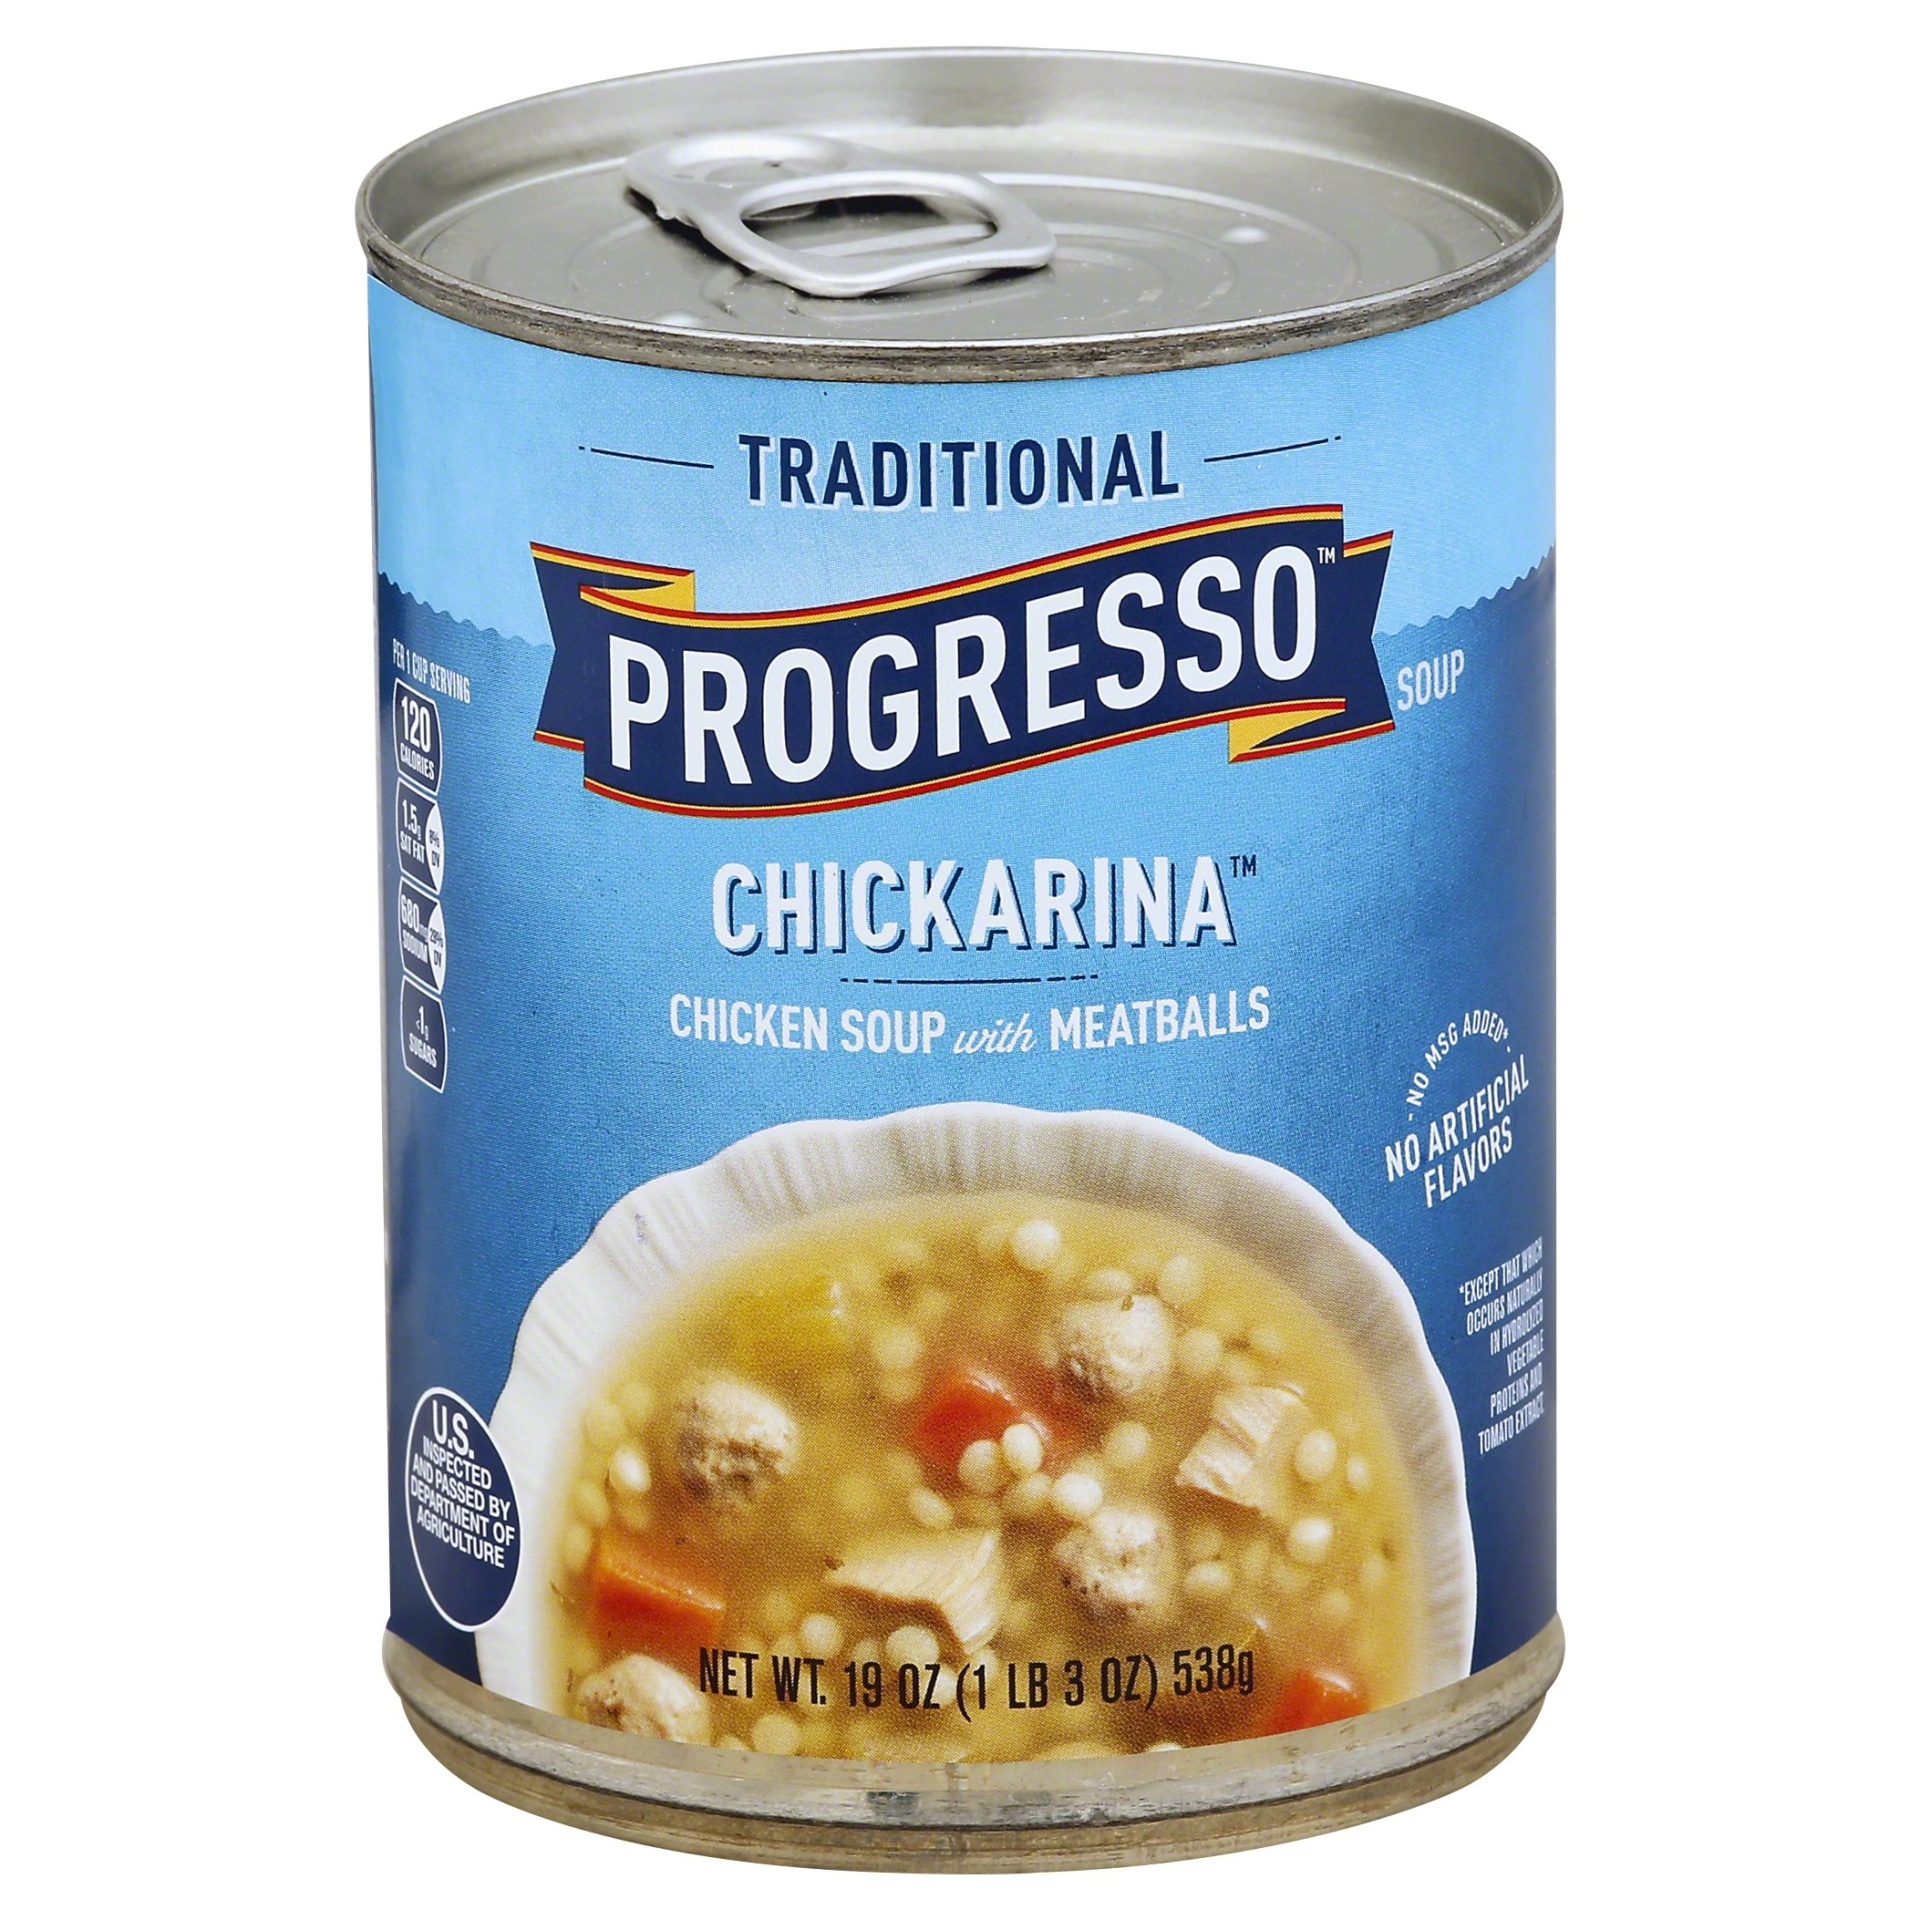 Progresso Traditional Chickarina Chicken Soup With Meatballs 19 oz | Shipt